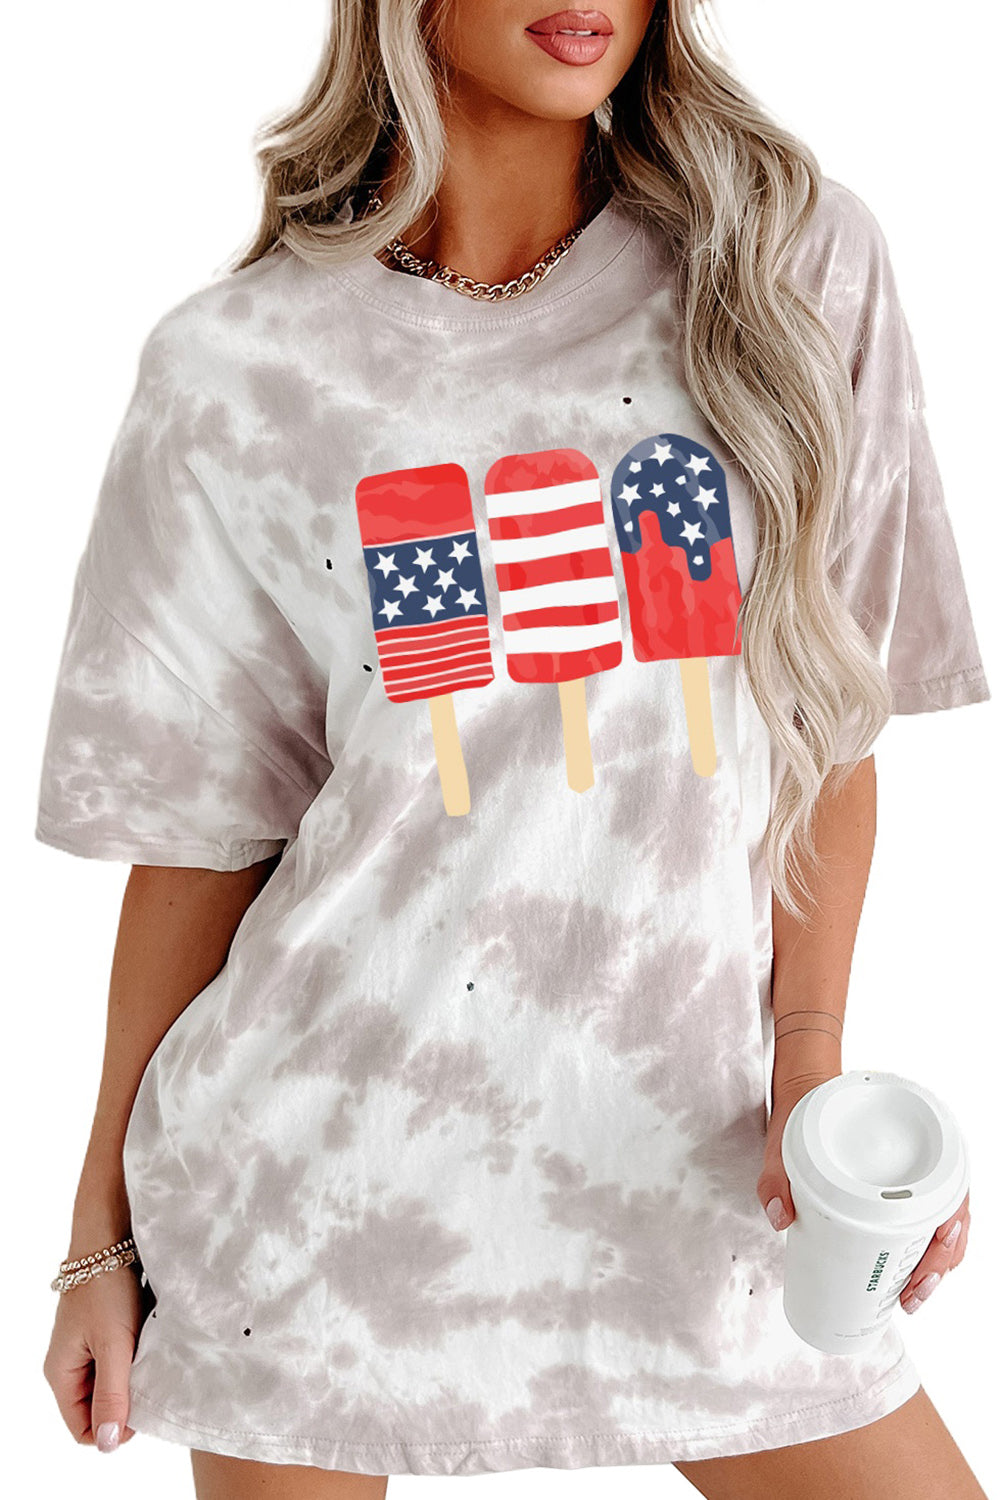 LC25221278-1-S, LC25221278-1-M, LC25221278-1-L, LC25221278-1-XL, White Women's American Flag Casual Oversize Tops Ice Pop Graphic Tie Dye Distressed T Shirt Dress